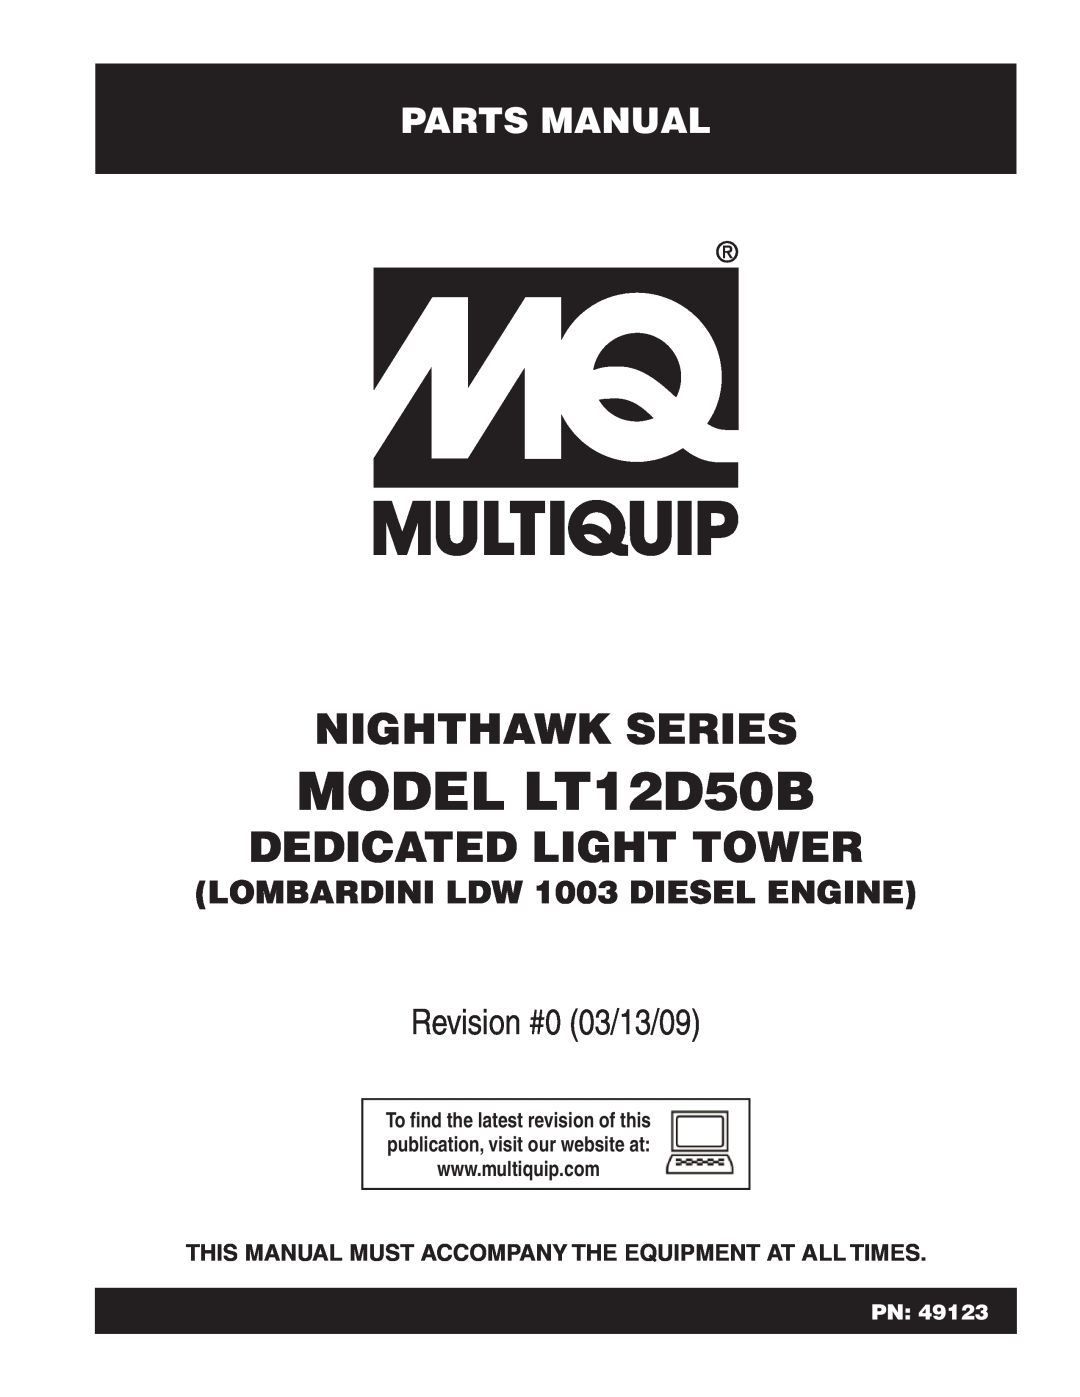 Multiquip manual Parts Manual, This Manual Must Accompany The Equipment At All Times, MODEL LT12D50B, Nighthawk Series 